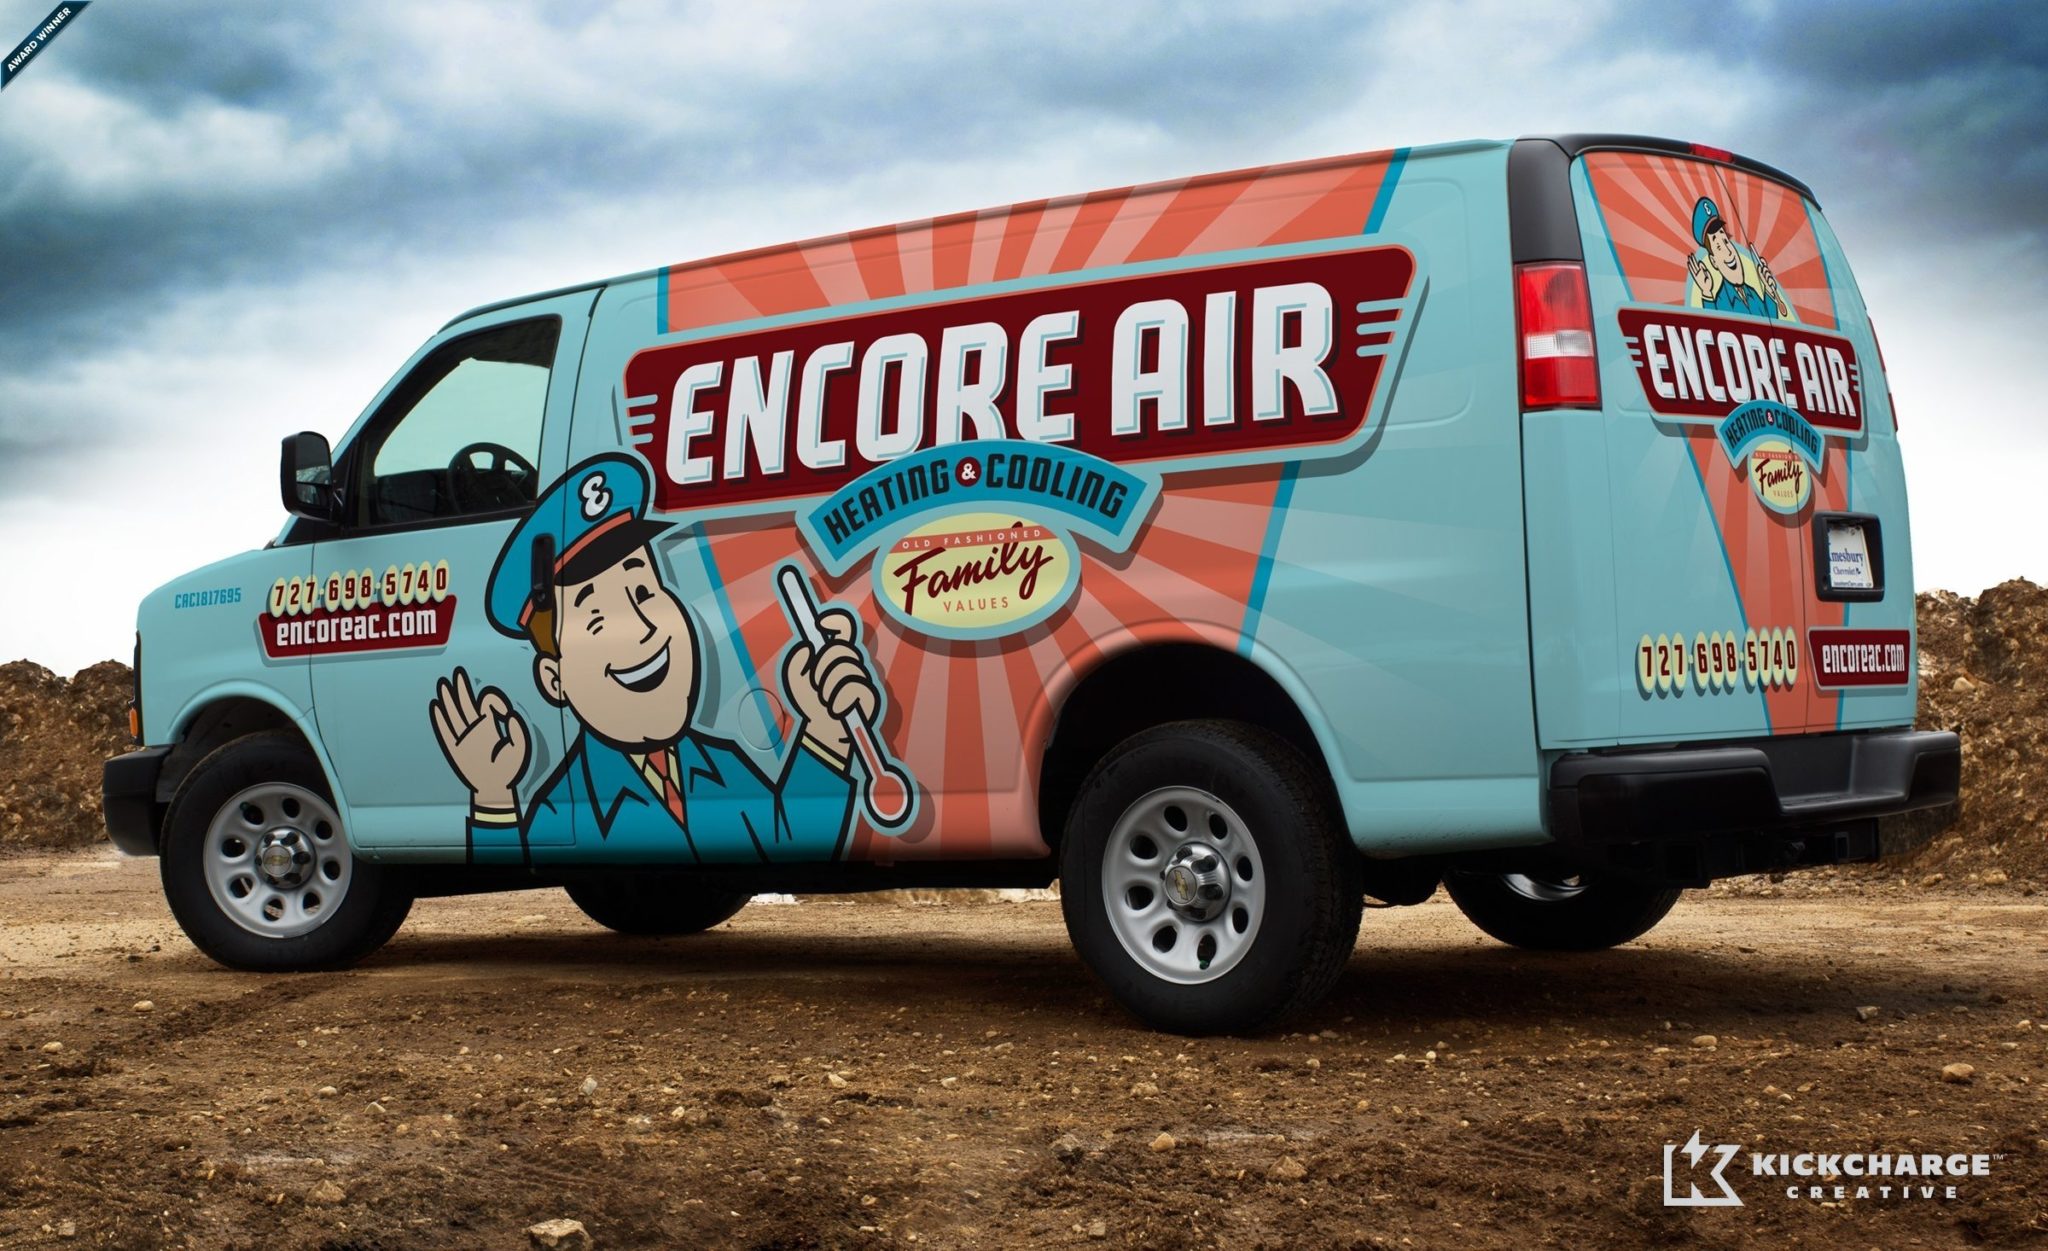 Award-winning vehicle wrap design for Encore Air Heating & Cooling, an HVAC company based in Largo, FL. This vehicle wrap won 2015 Vehicle Graphics Readers' Choice in the Signs of the Times 9th Annual Graphics Contest for service vehicles.